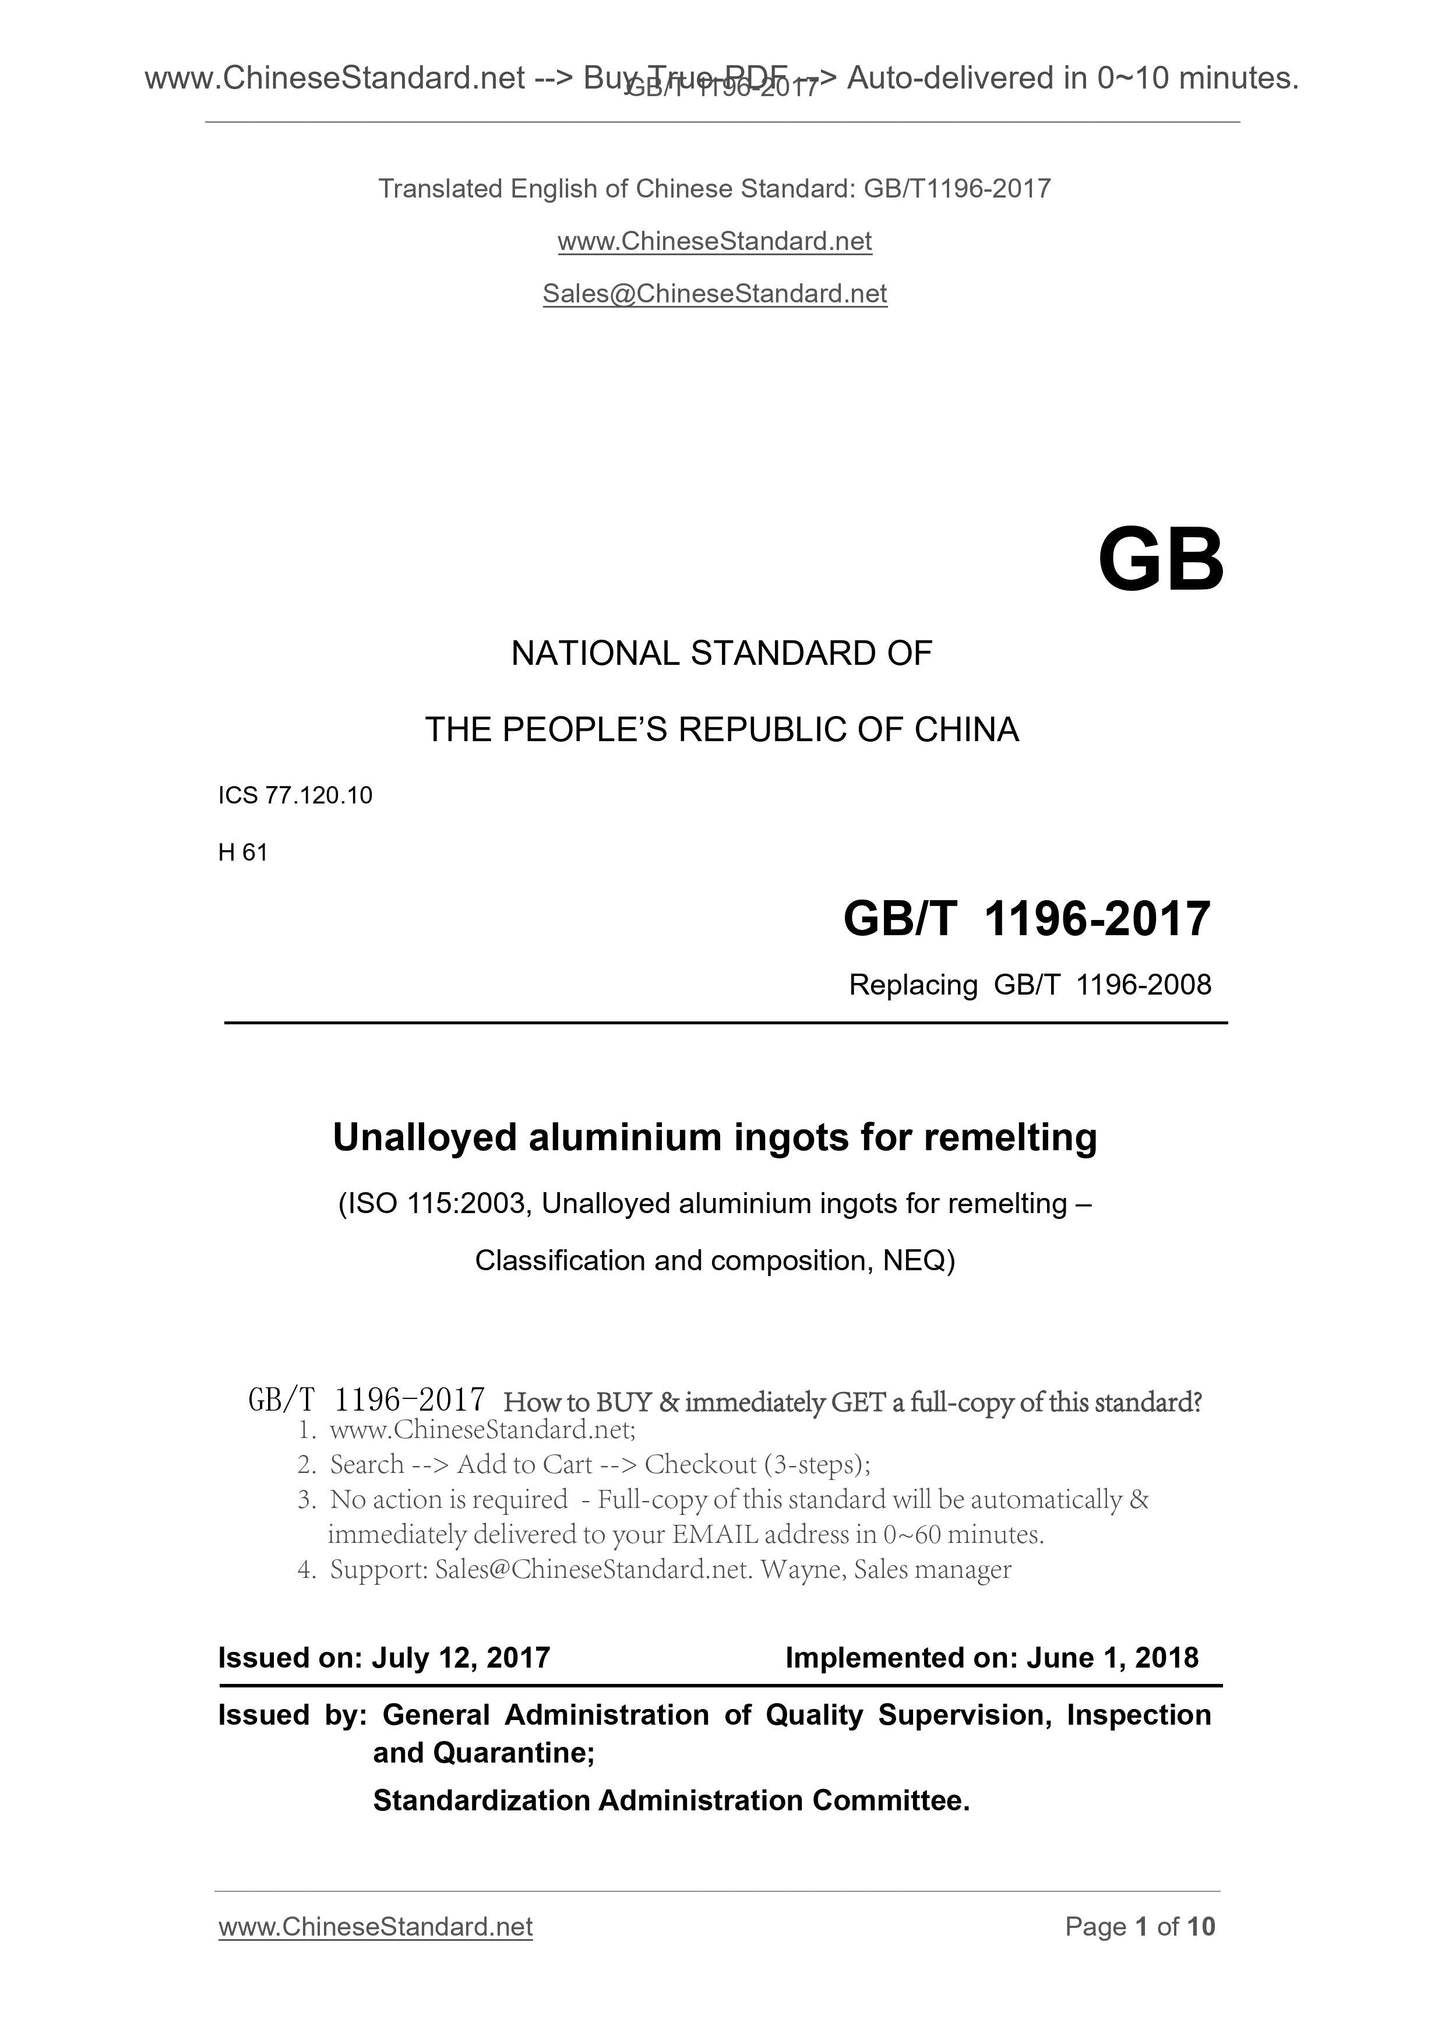 GB/T 1196-2017 Page 1